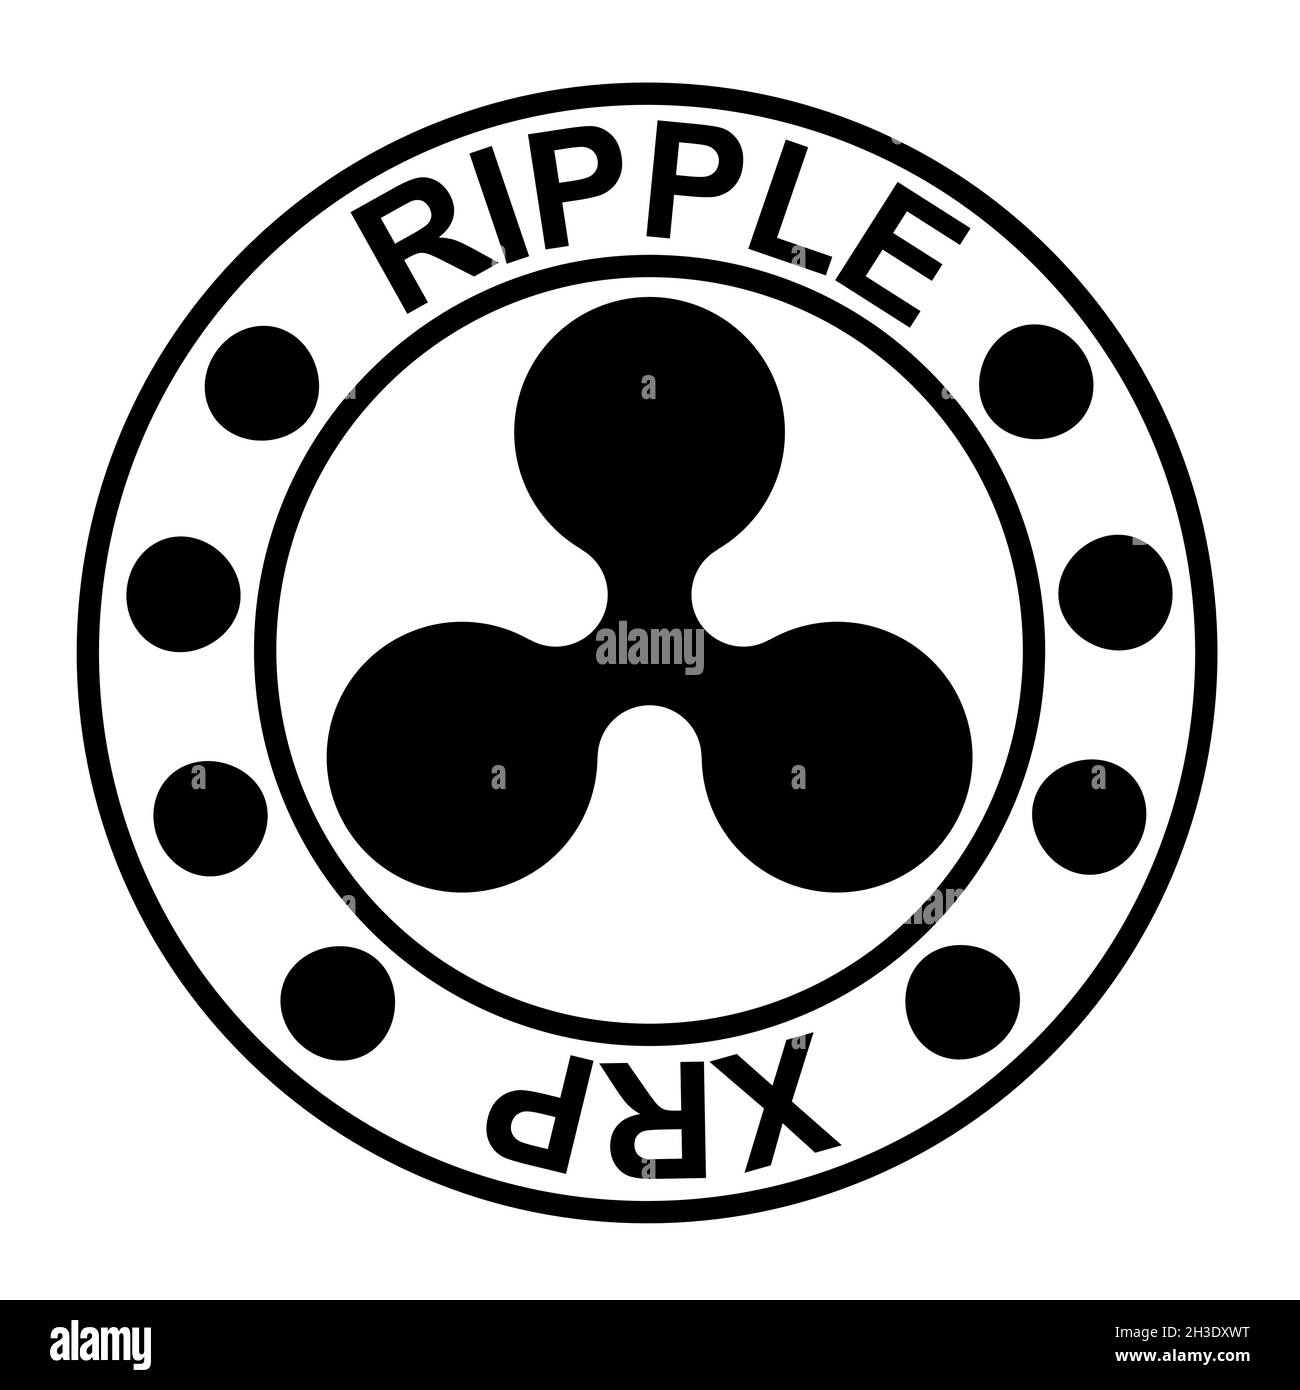 Cryptocurrency coin XRP Ripple token for stock exchange stock illustration Stock Vector